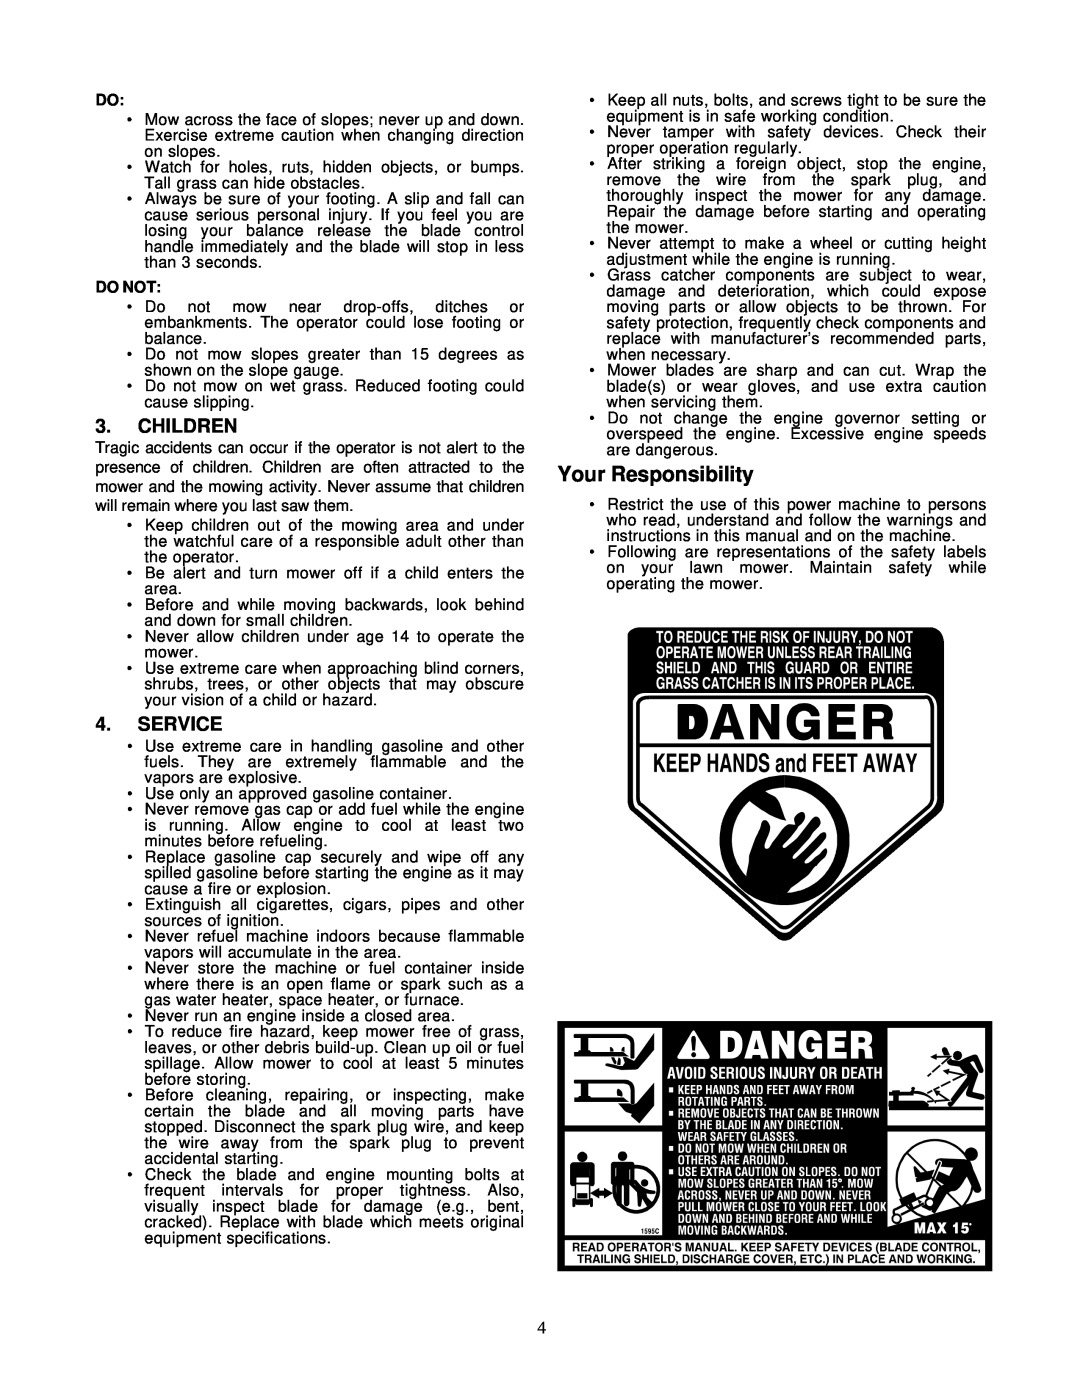 White LC-436 manual Your Responsibility, Children, Service 